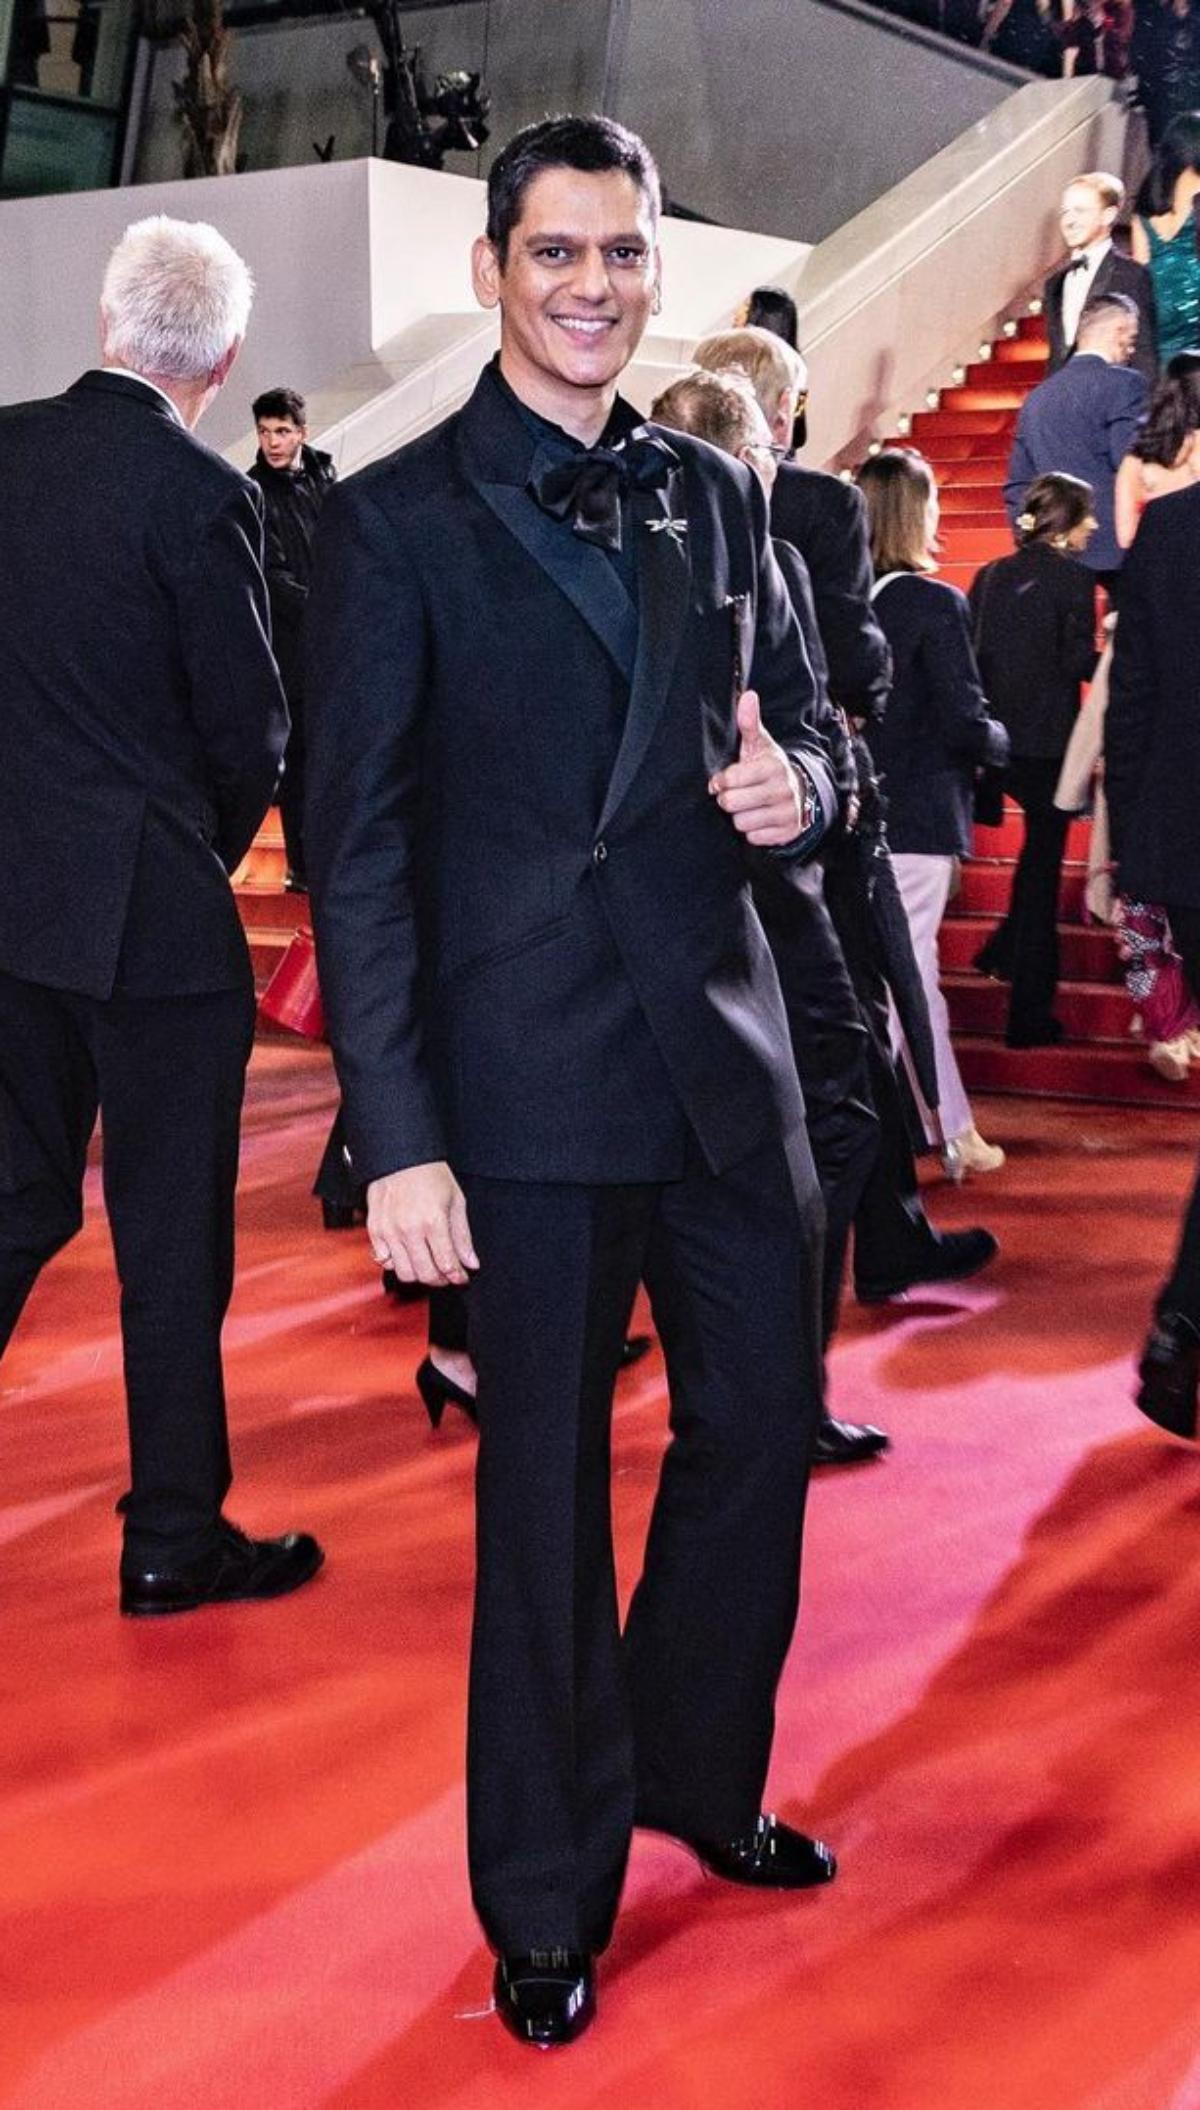 The 'Dahaad' actor, Vijay Varma who walked the coveted Cannes red carpet for the second time on day 2, stole the spotlight as he walked the red carpet wearing a chic black suit, which consisted of a black coat and matching trousers. The actor looked dapper as he accessorised his red carpet ensemble with a silver dragonfly borch and a unique black silk bow tie.